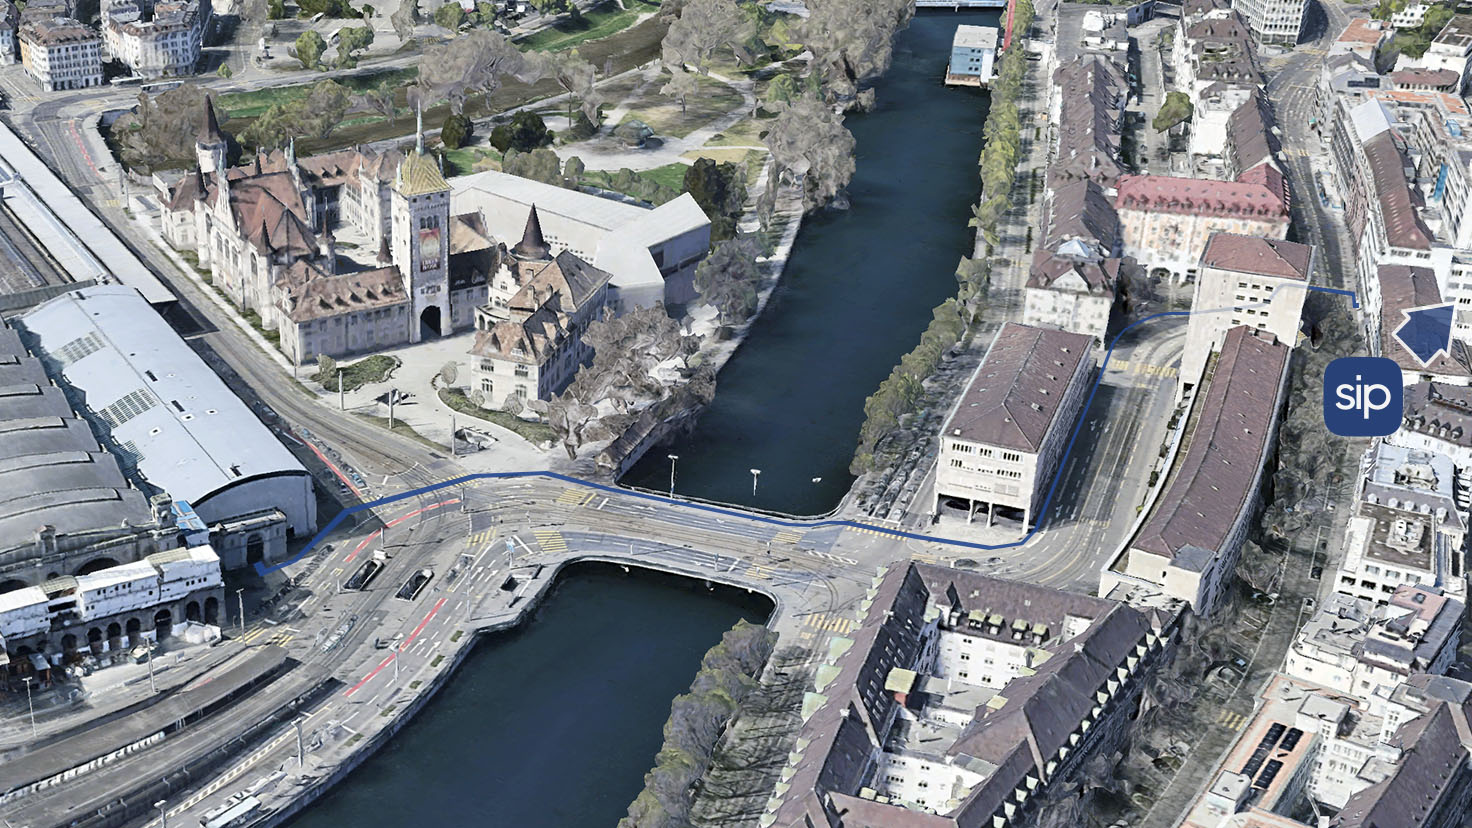 3D aerial view of walking directions to ETH STD Building from HB Zürich